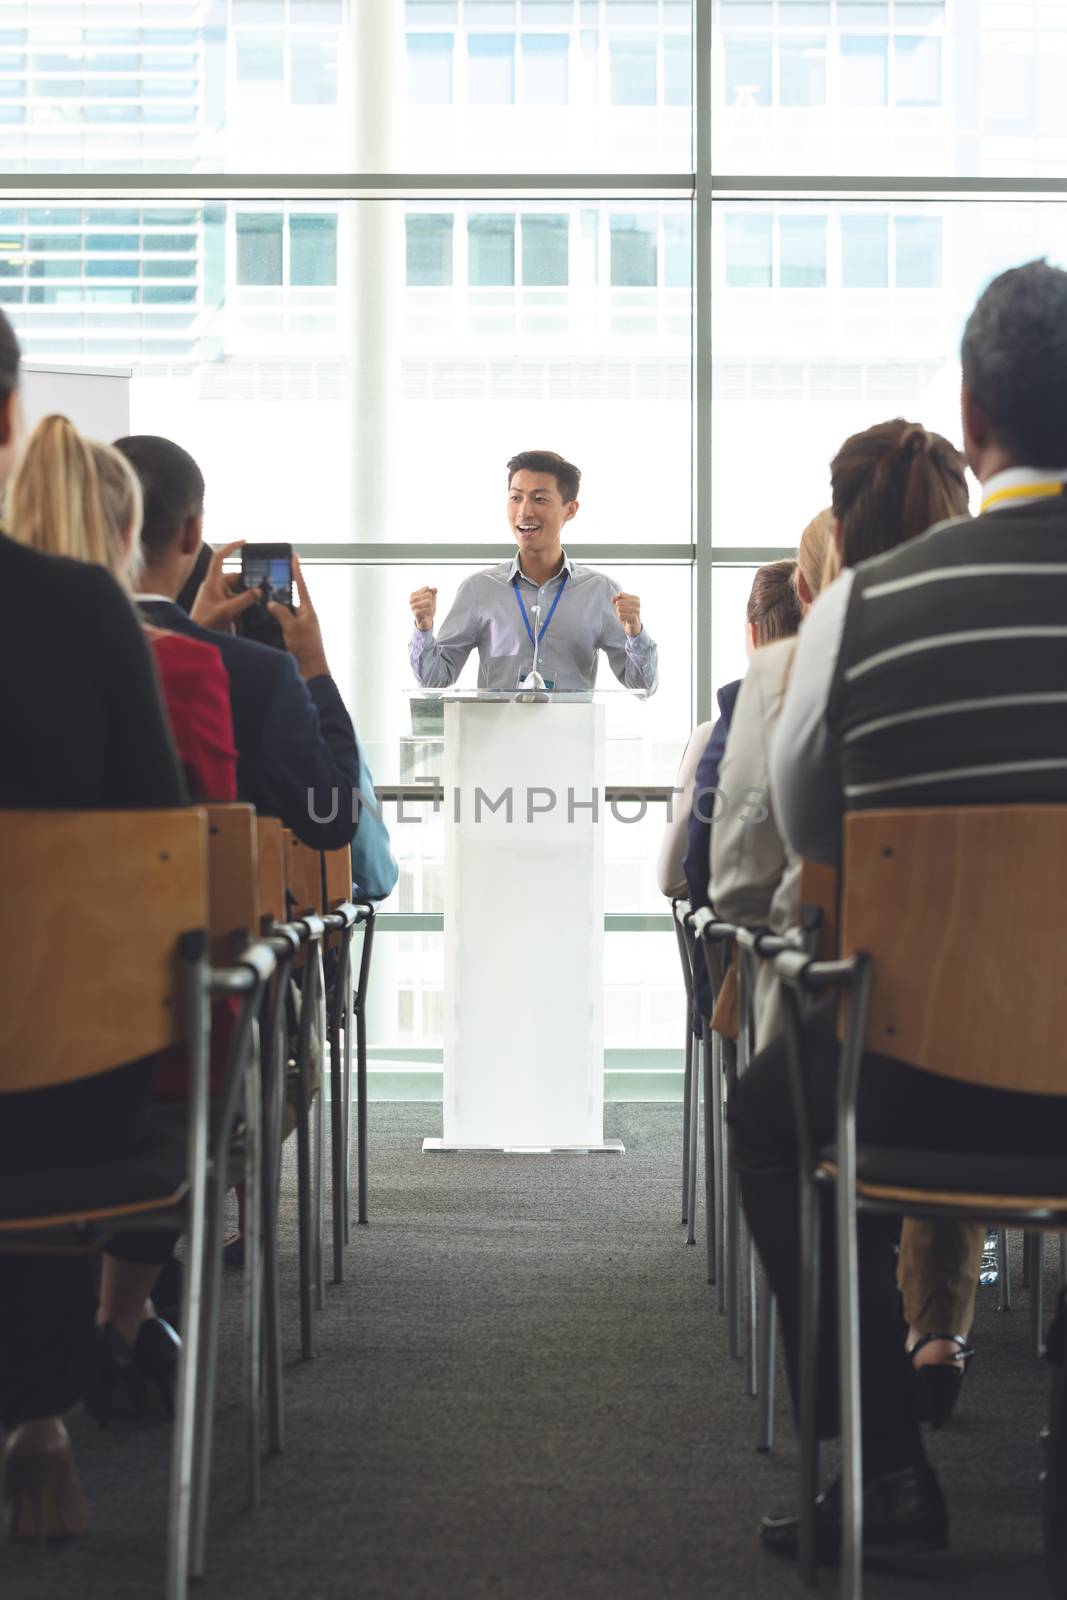 Front view of young Asian businessman speaking while business people sit in front of him at business seminar in office building